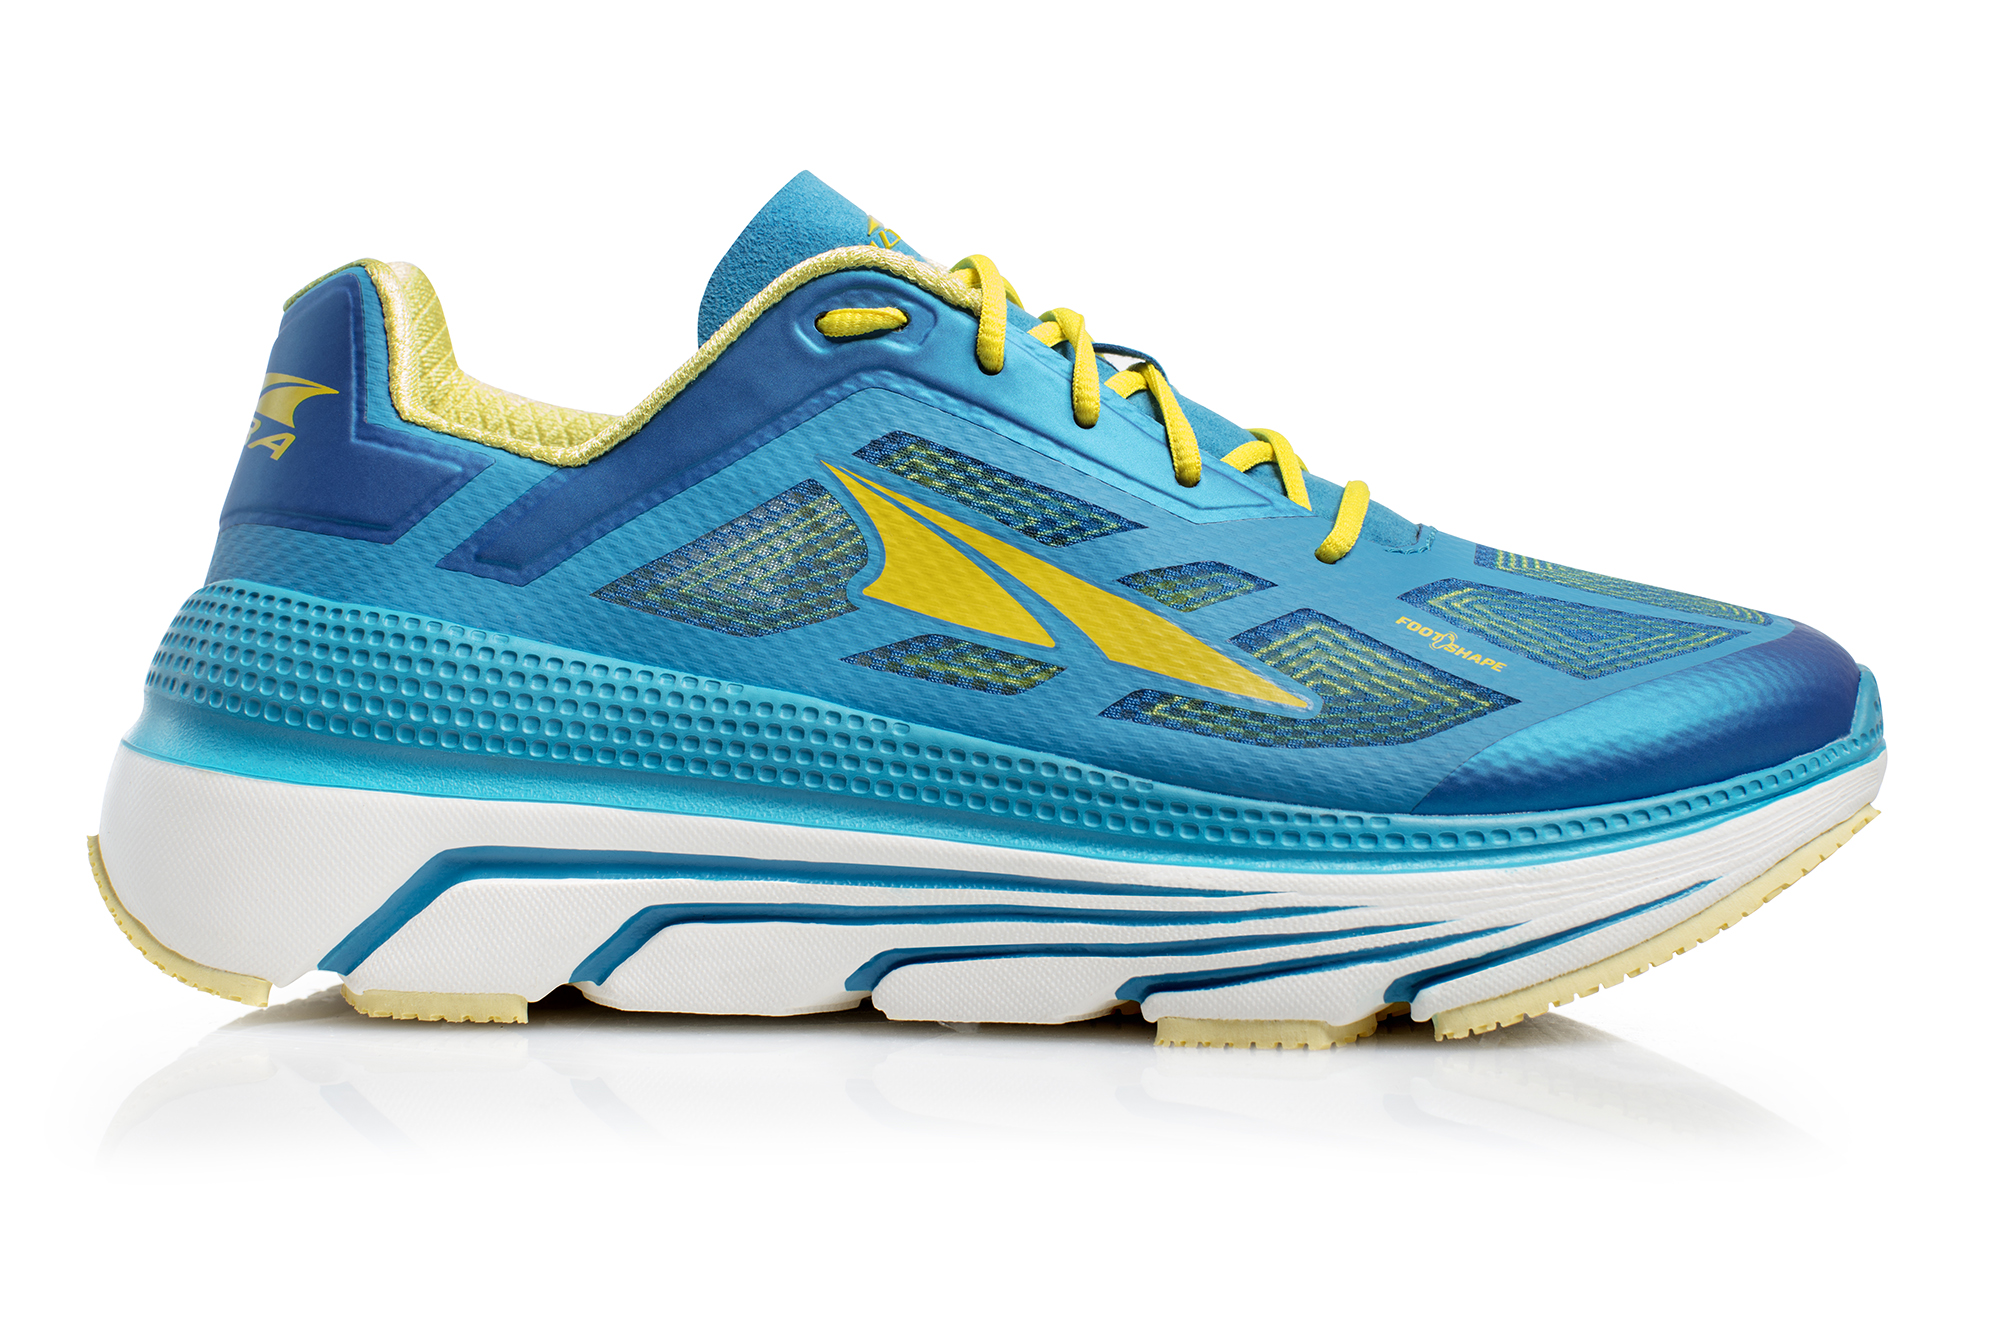 Altra Footwear Announces Three New Road Shoes With A Fast and Light ...